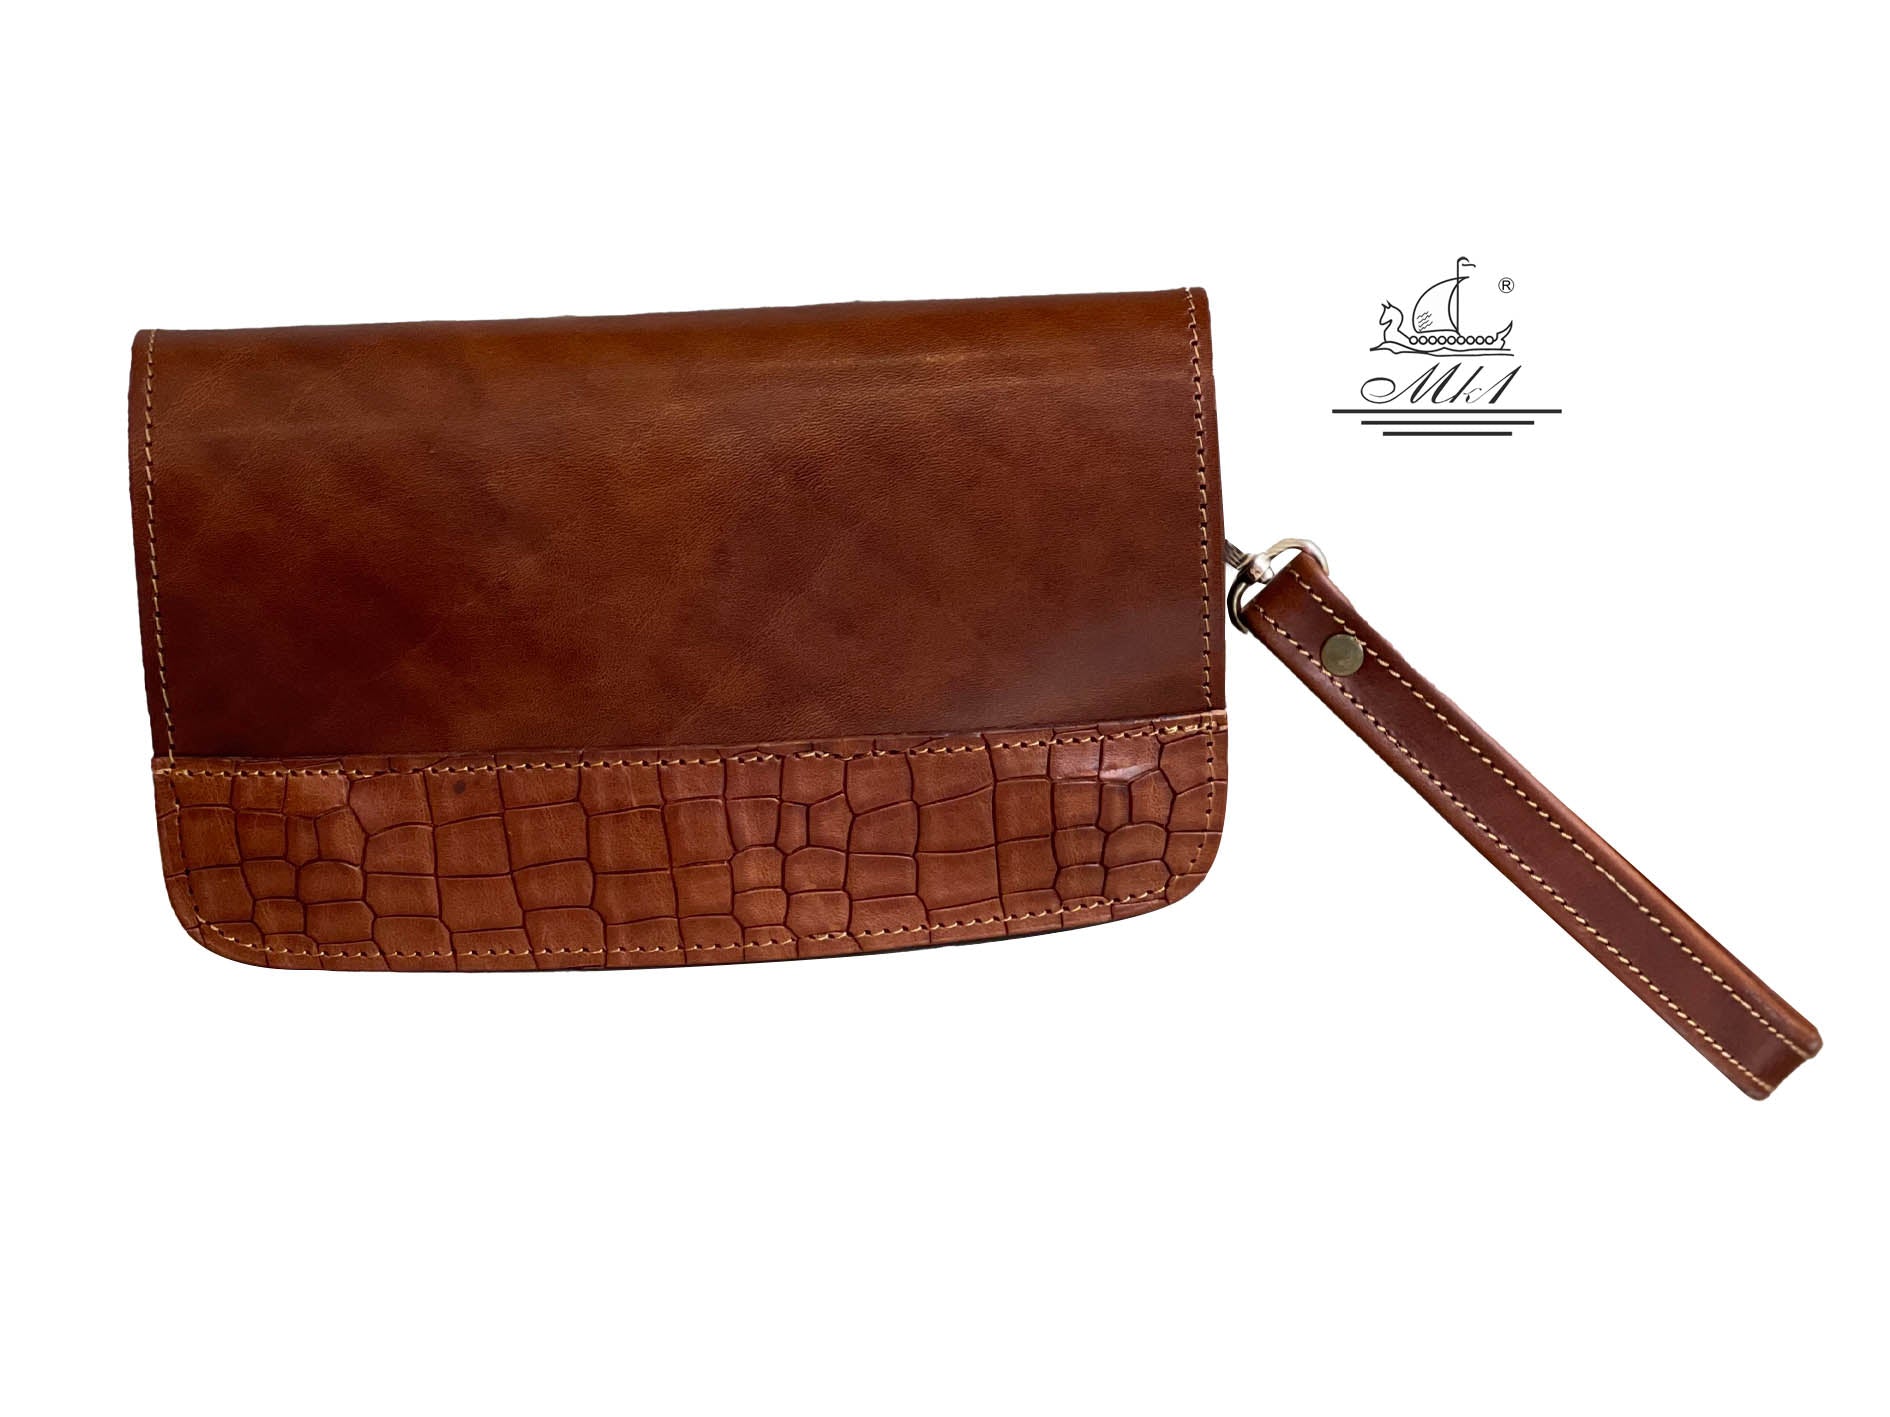 "Oneiros" - small crossbody bag handcrafted from natural light brown leather with croco design WT/58KR